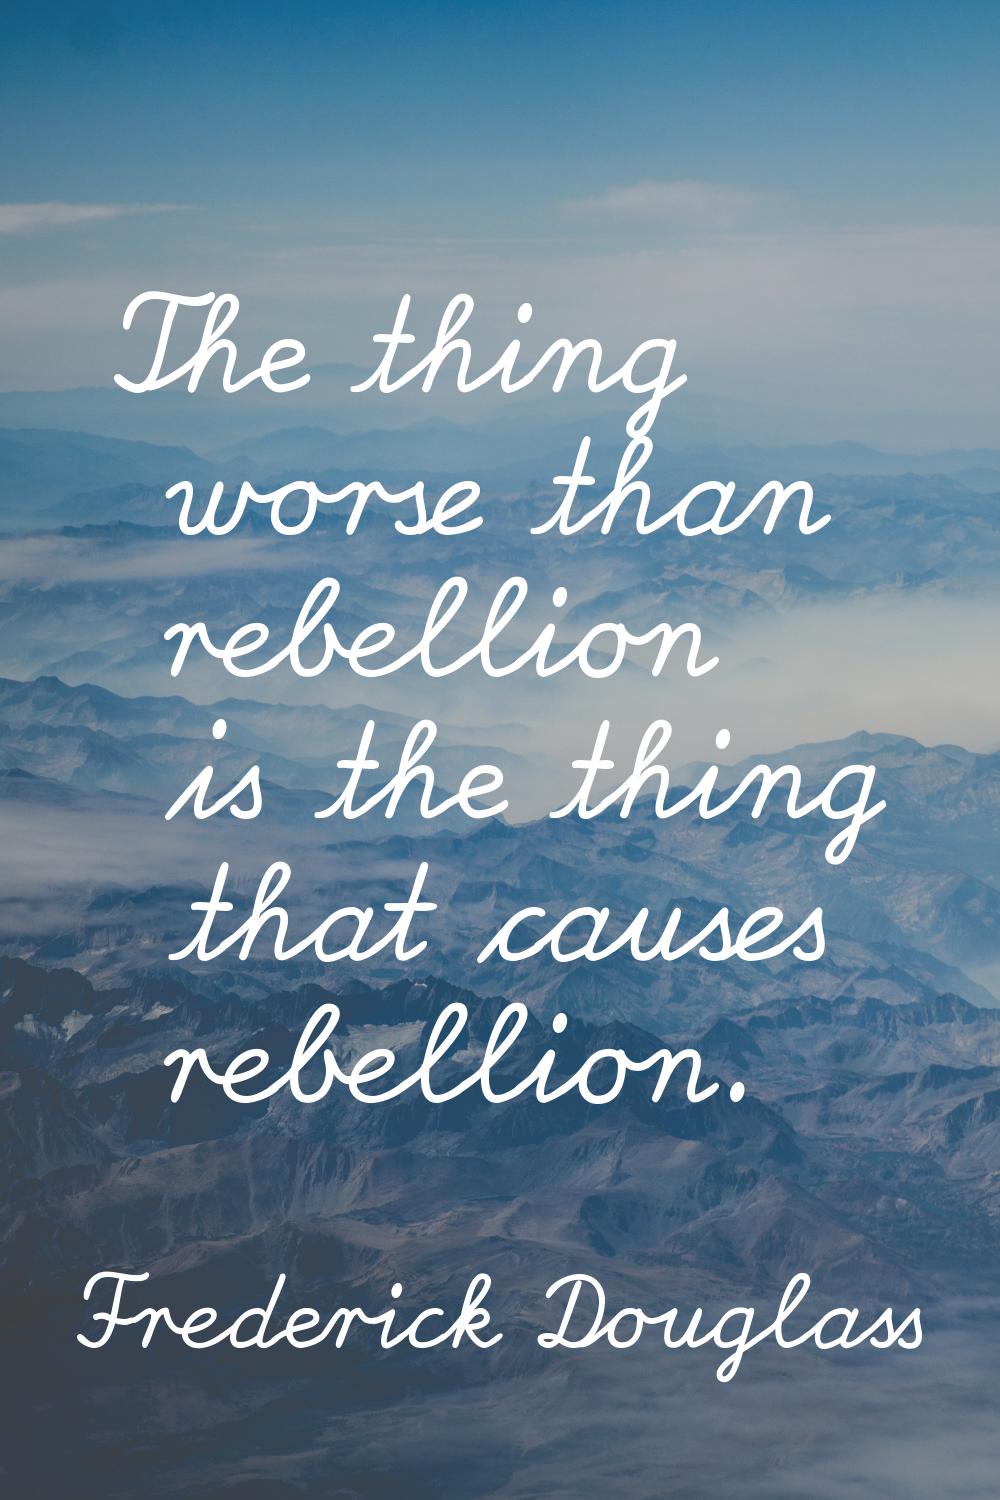 The thing worse than rebellion is the thing that causes rebellion.